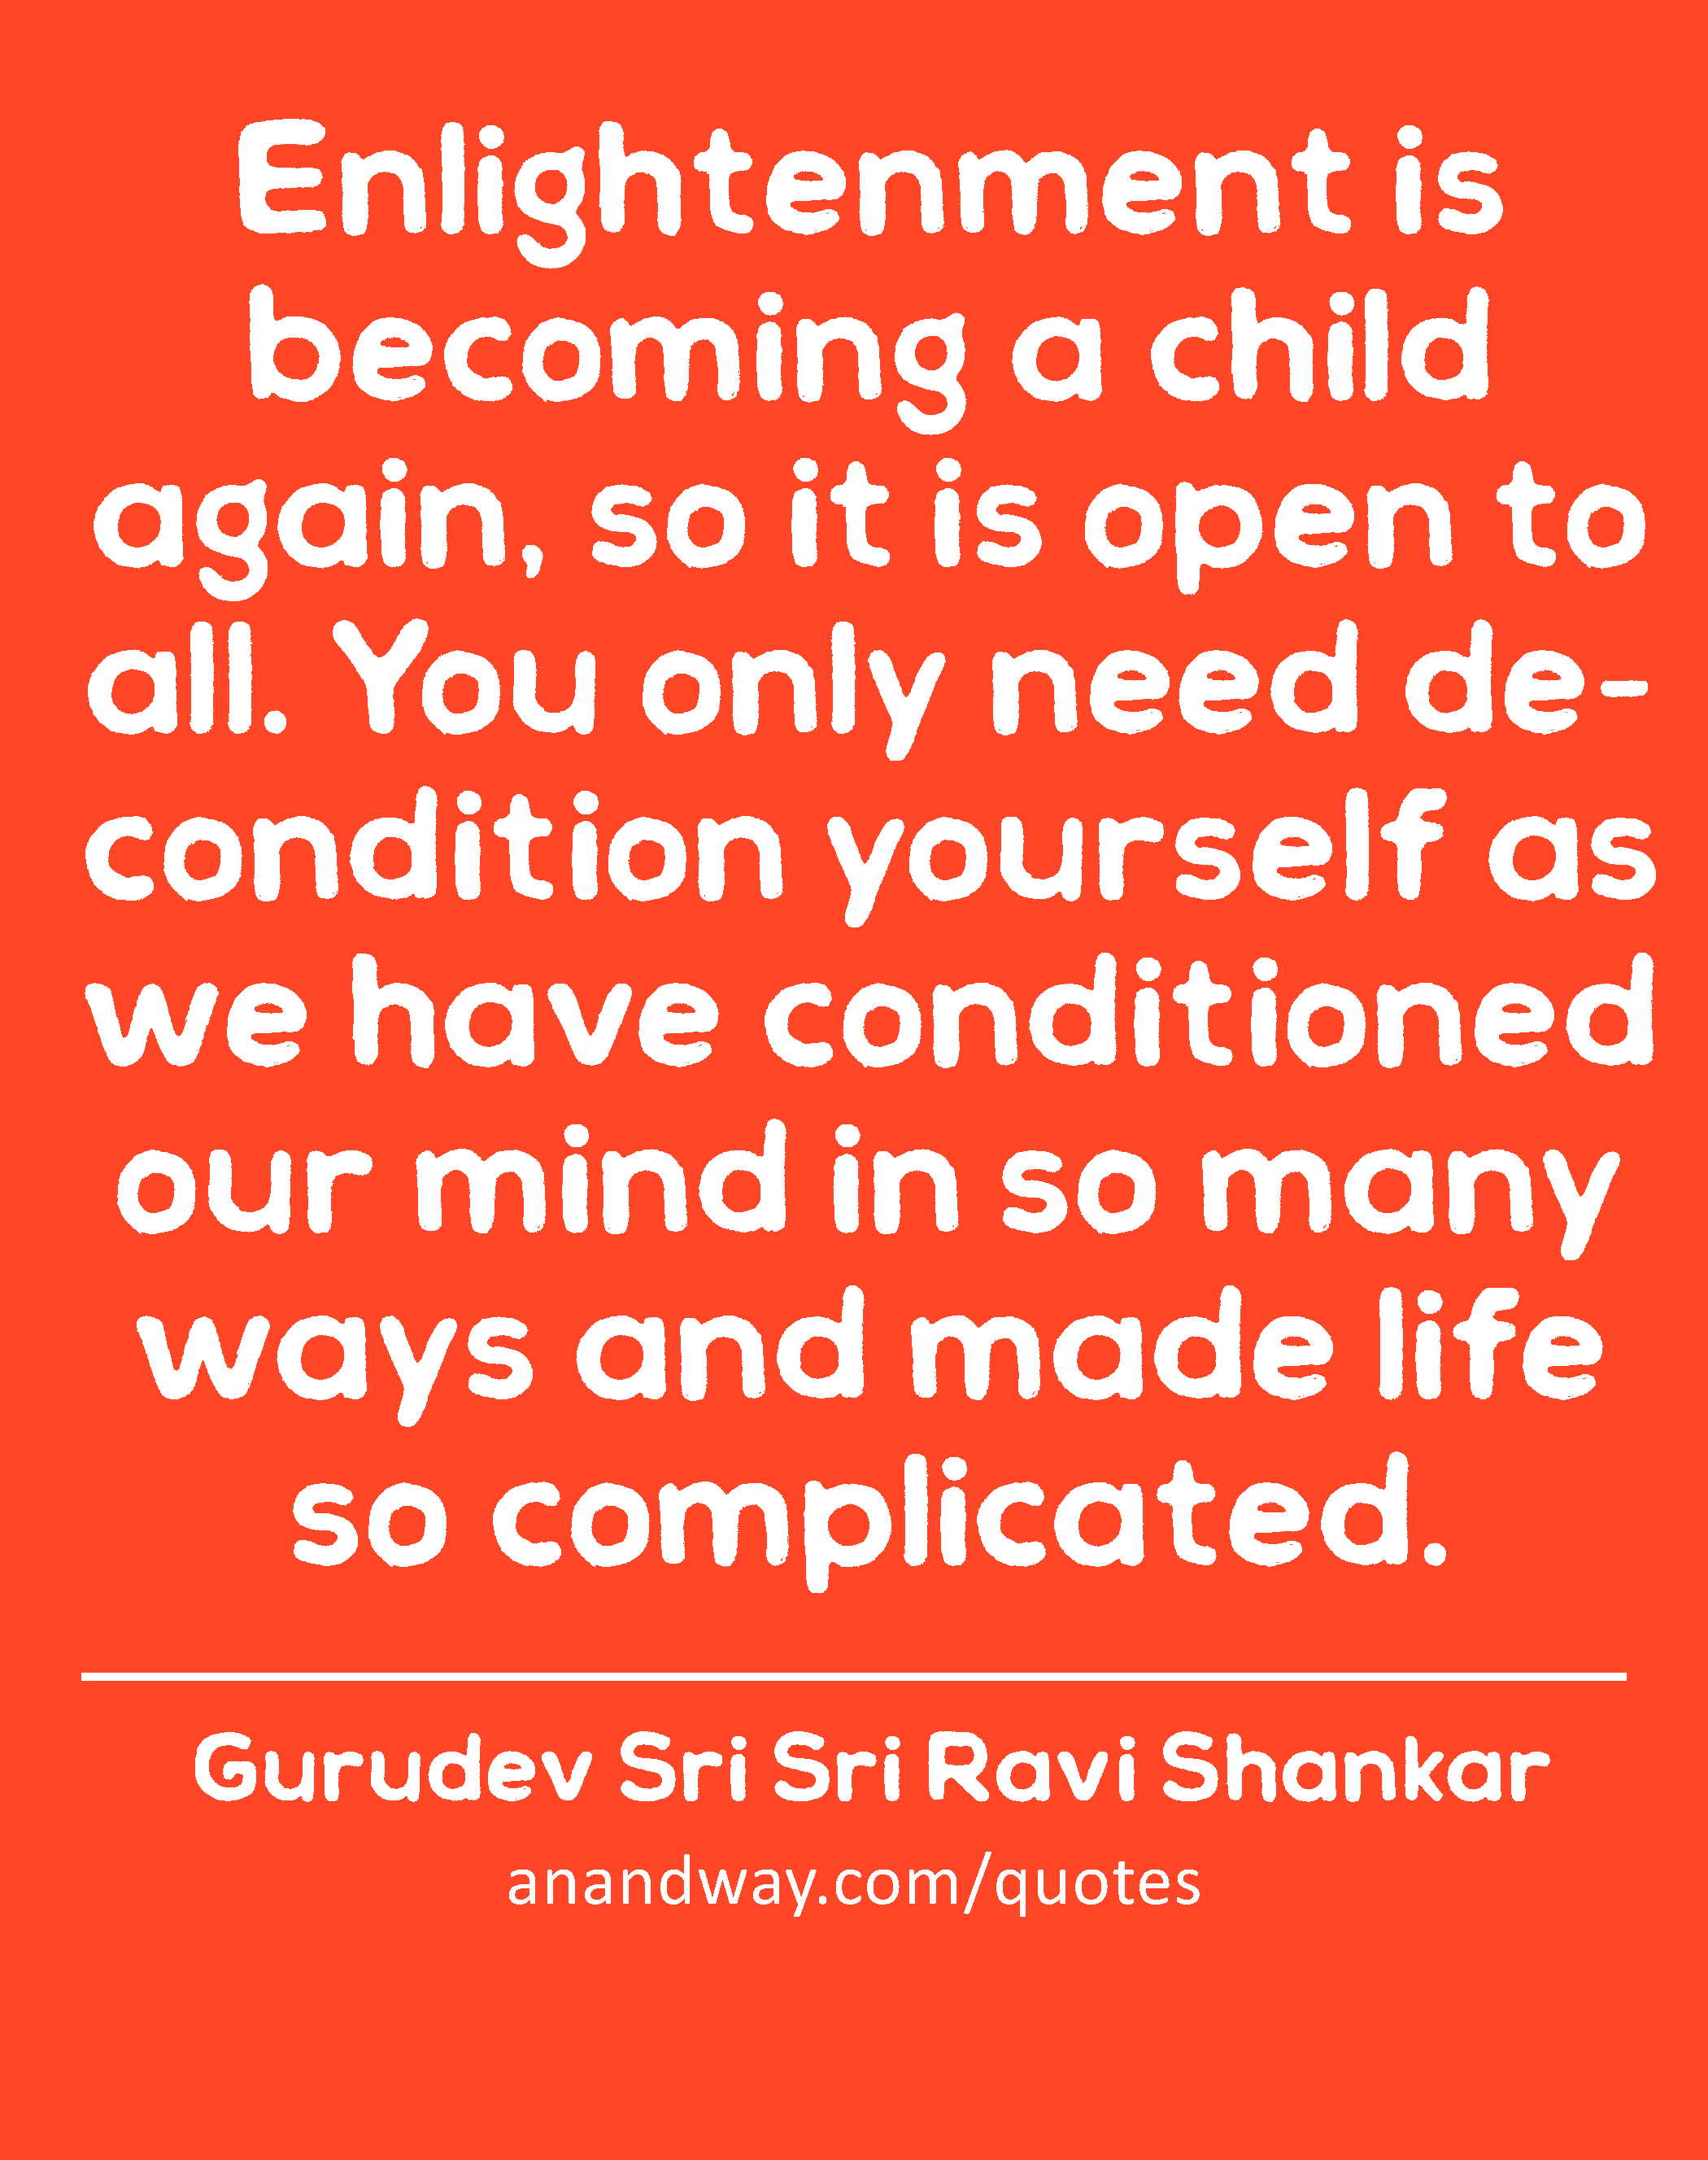 Enlightenment is becoming a child again, so it is open to all. You only need de-condition yourself
 -Gurudev Sri Sri Ravi Shankar